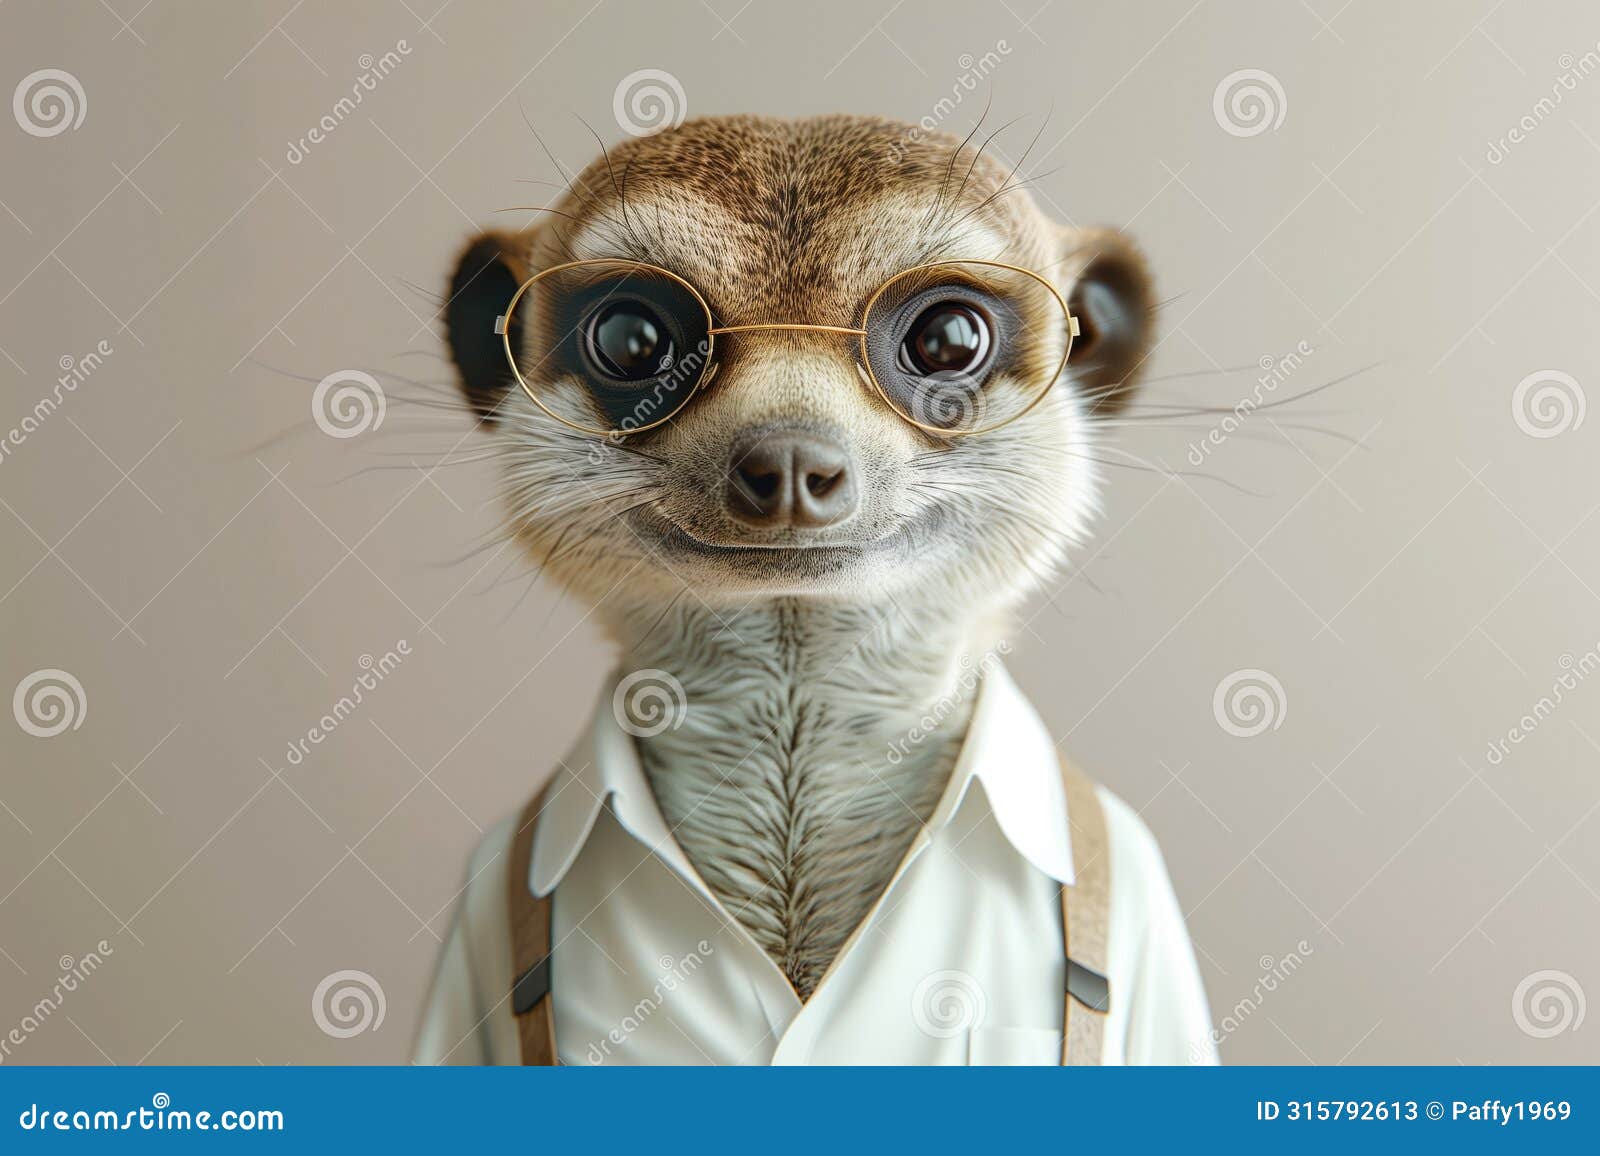 scholarly meerkat with glasses in a white shirt, concept of education.